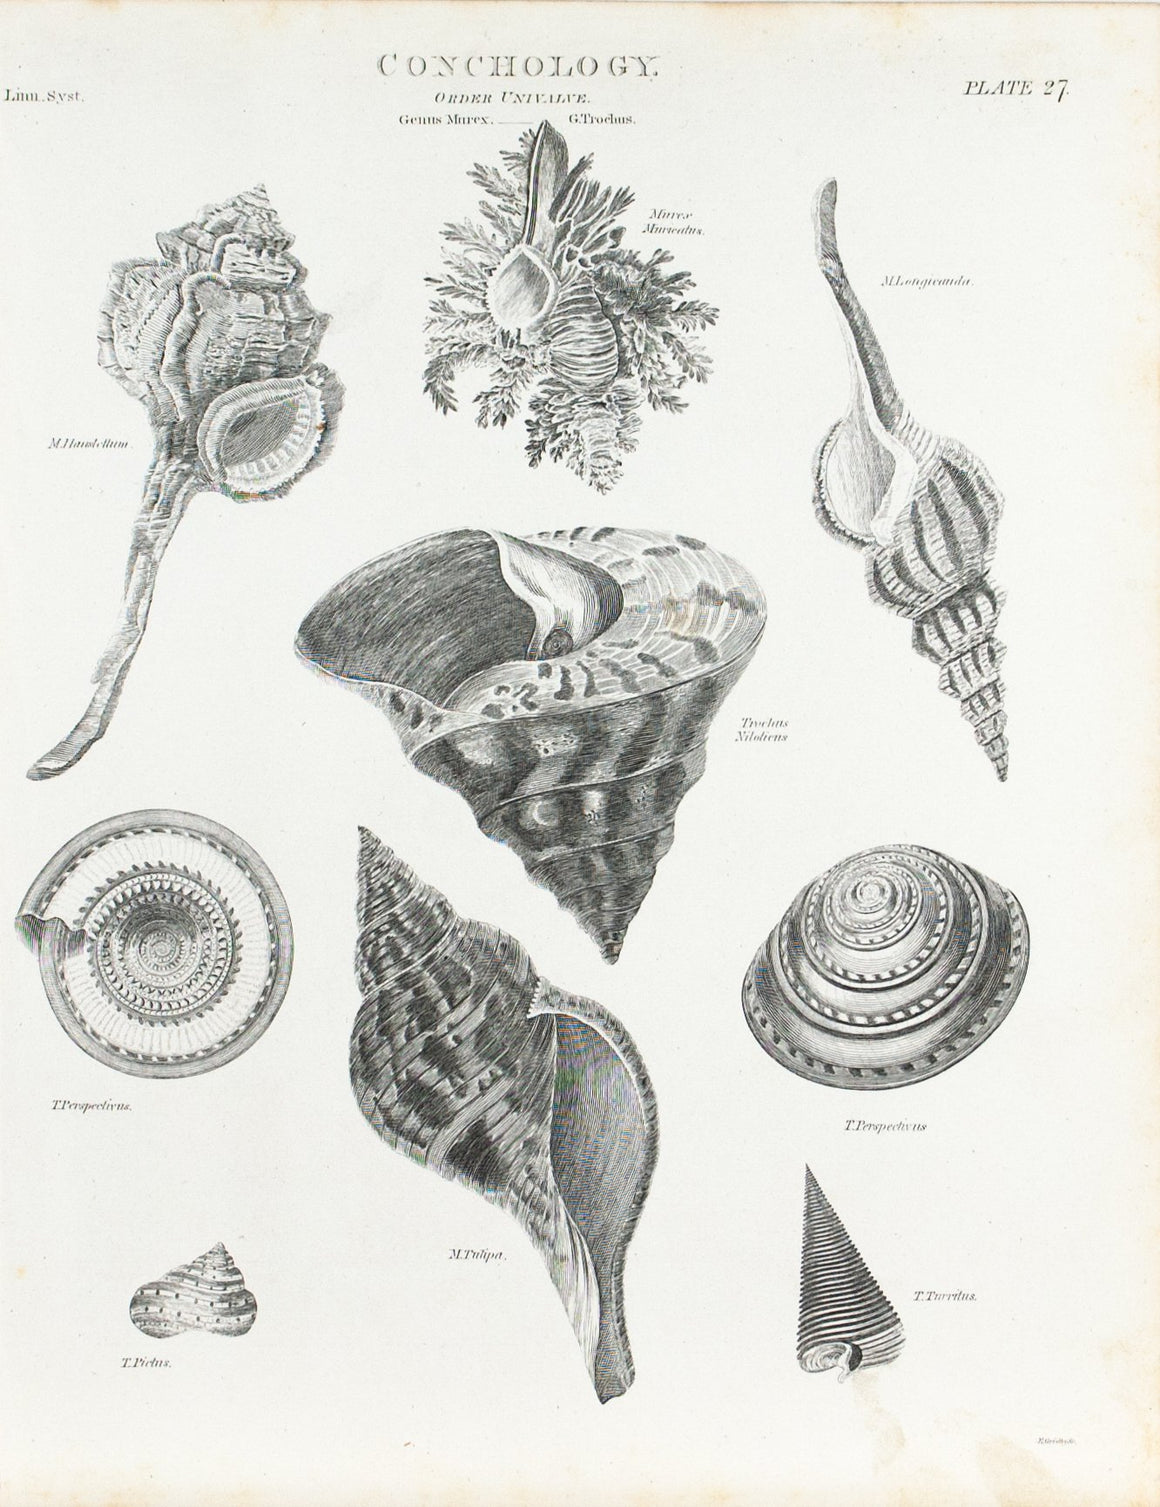 1834 Conchology Plate 27